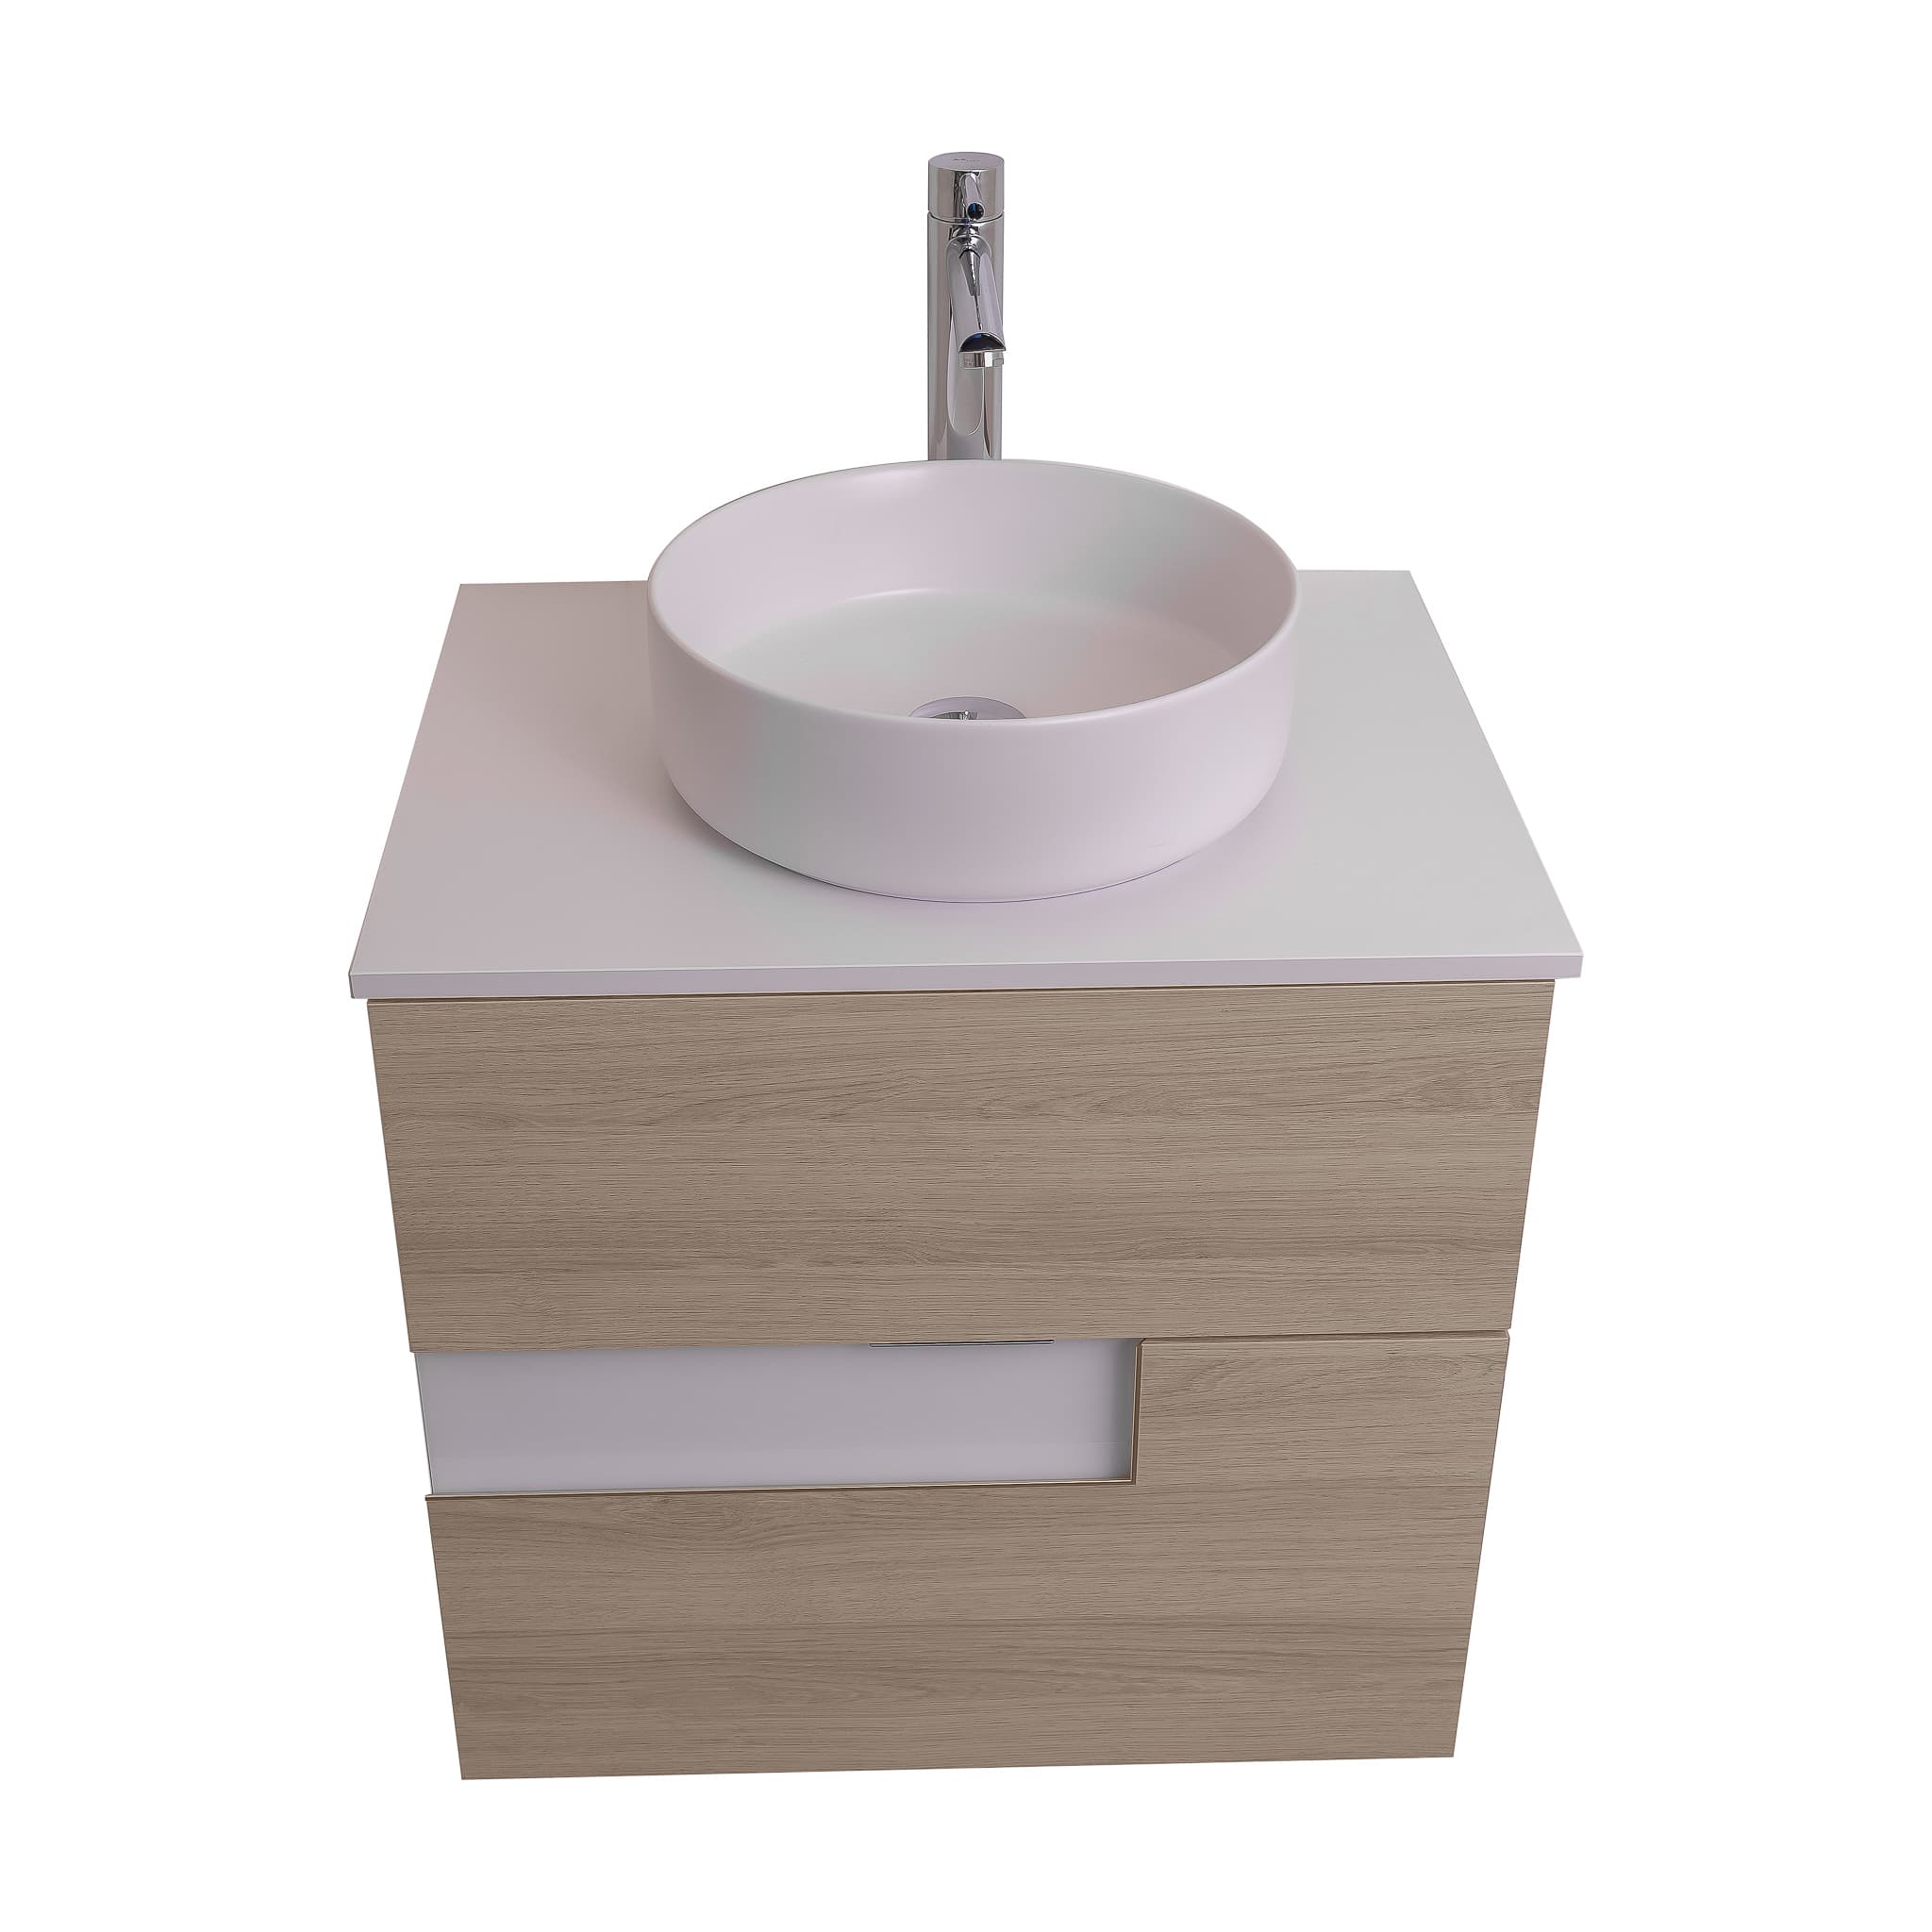 Vision 23.5 Natural Light Wood Cabinet, Ares White Top And Ares White Ceramic Basin, Wall Mounted Modern Vanity Set